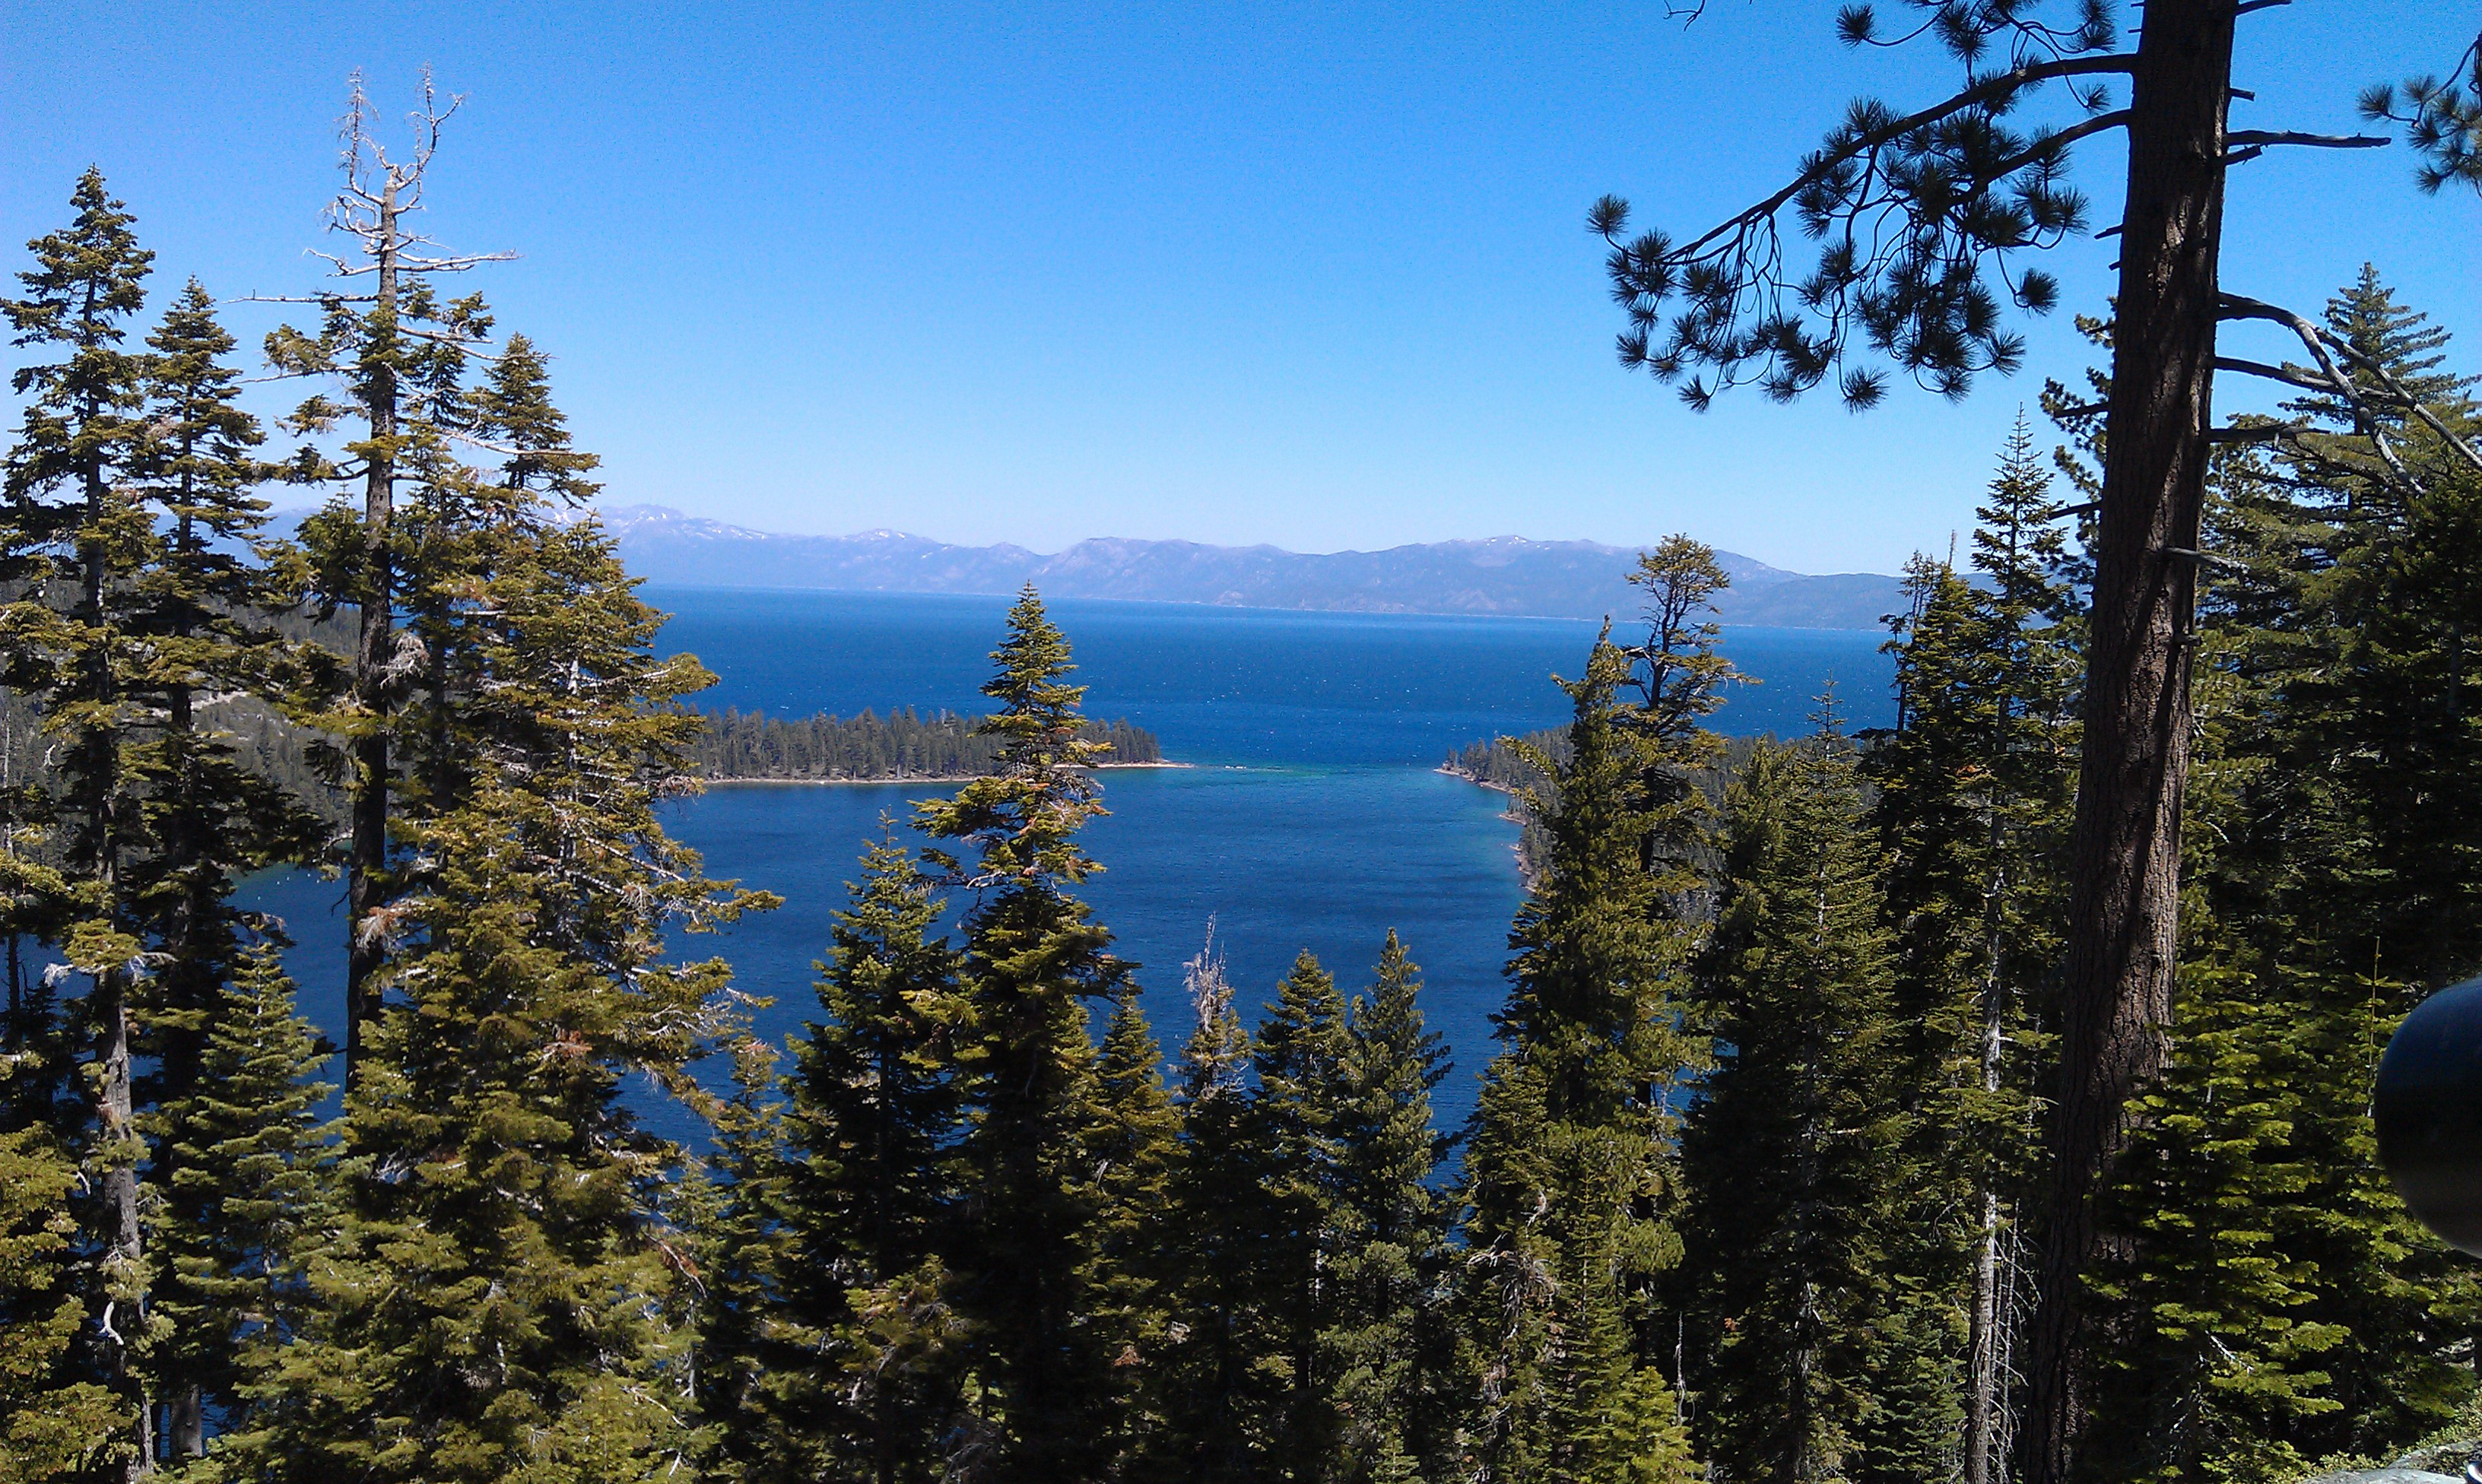 Emerald Bay from the west